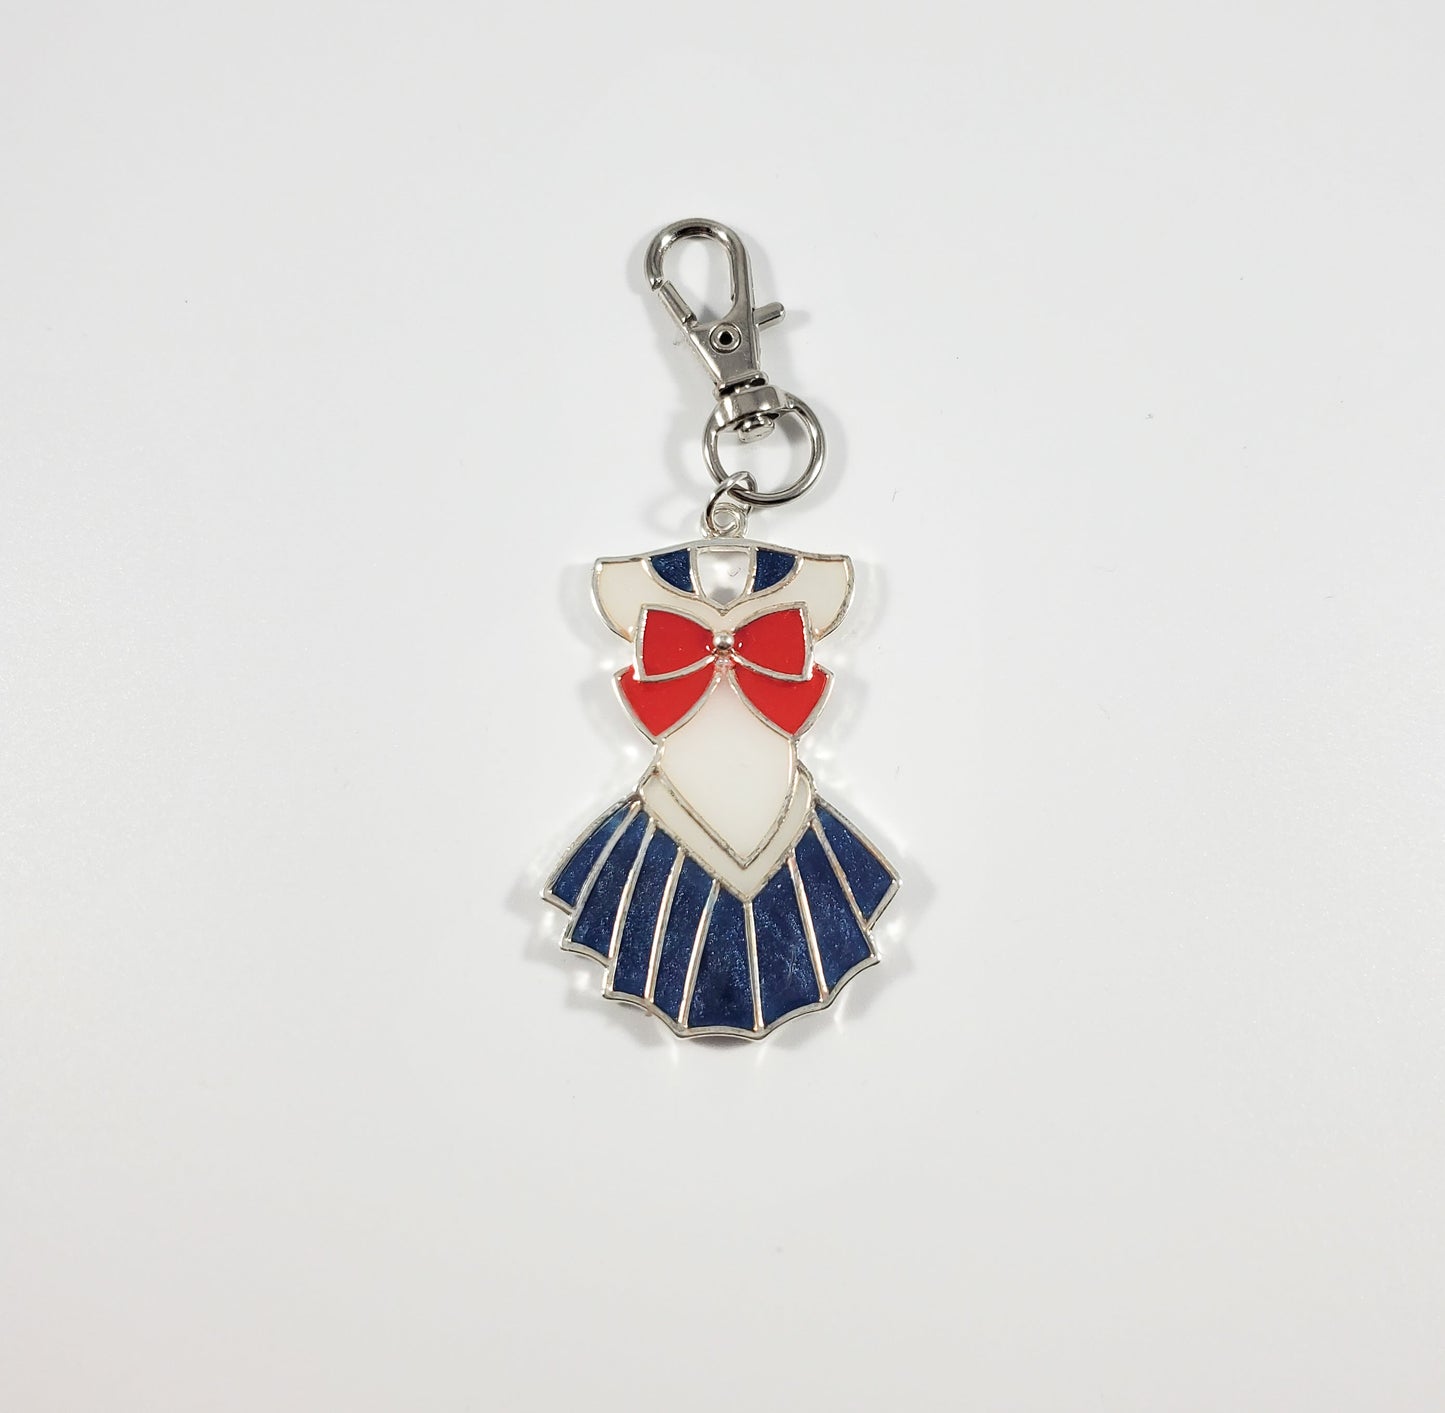 Sailor Mars charm necklace and keychain